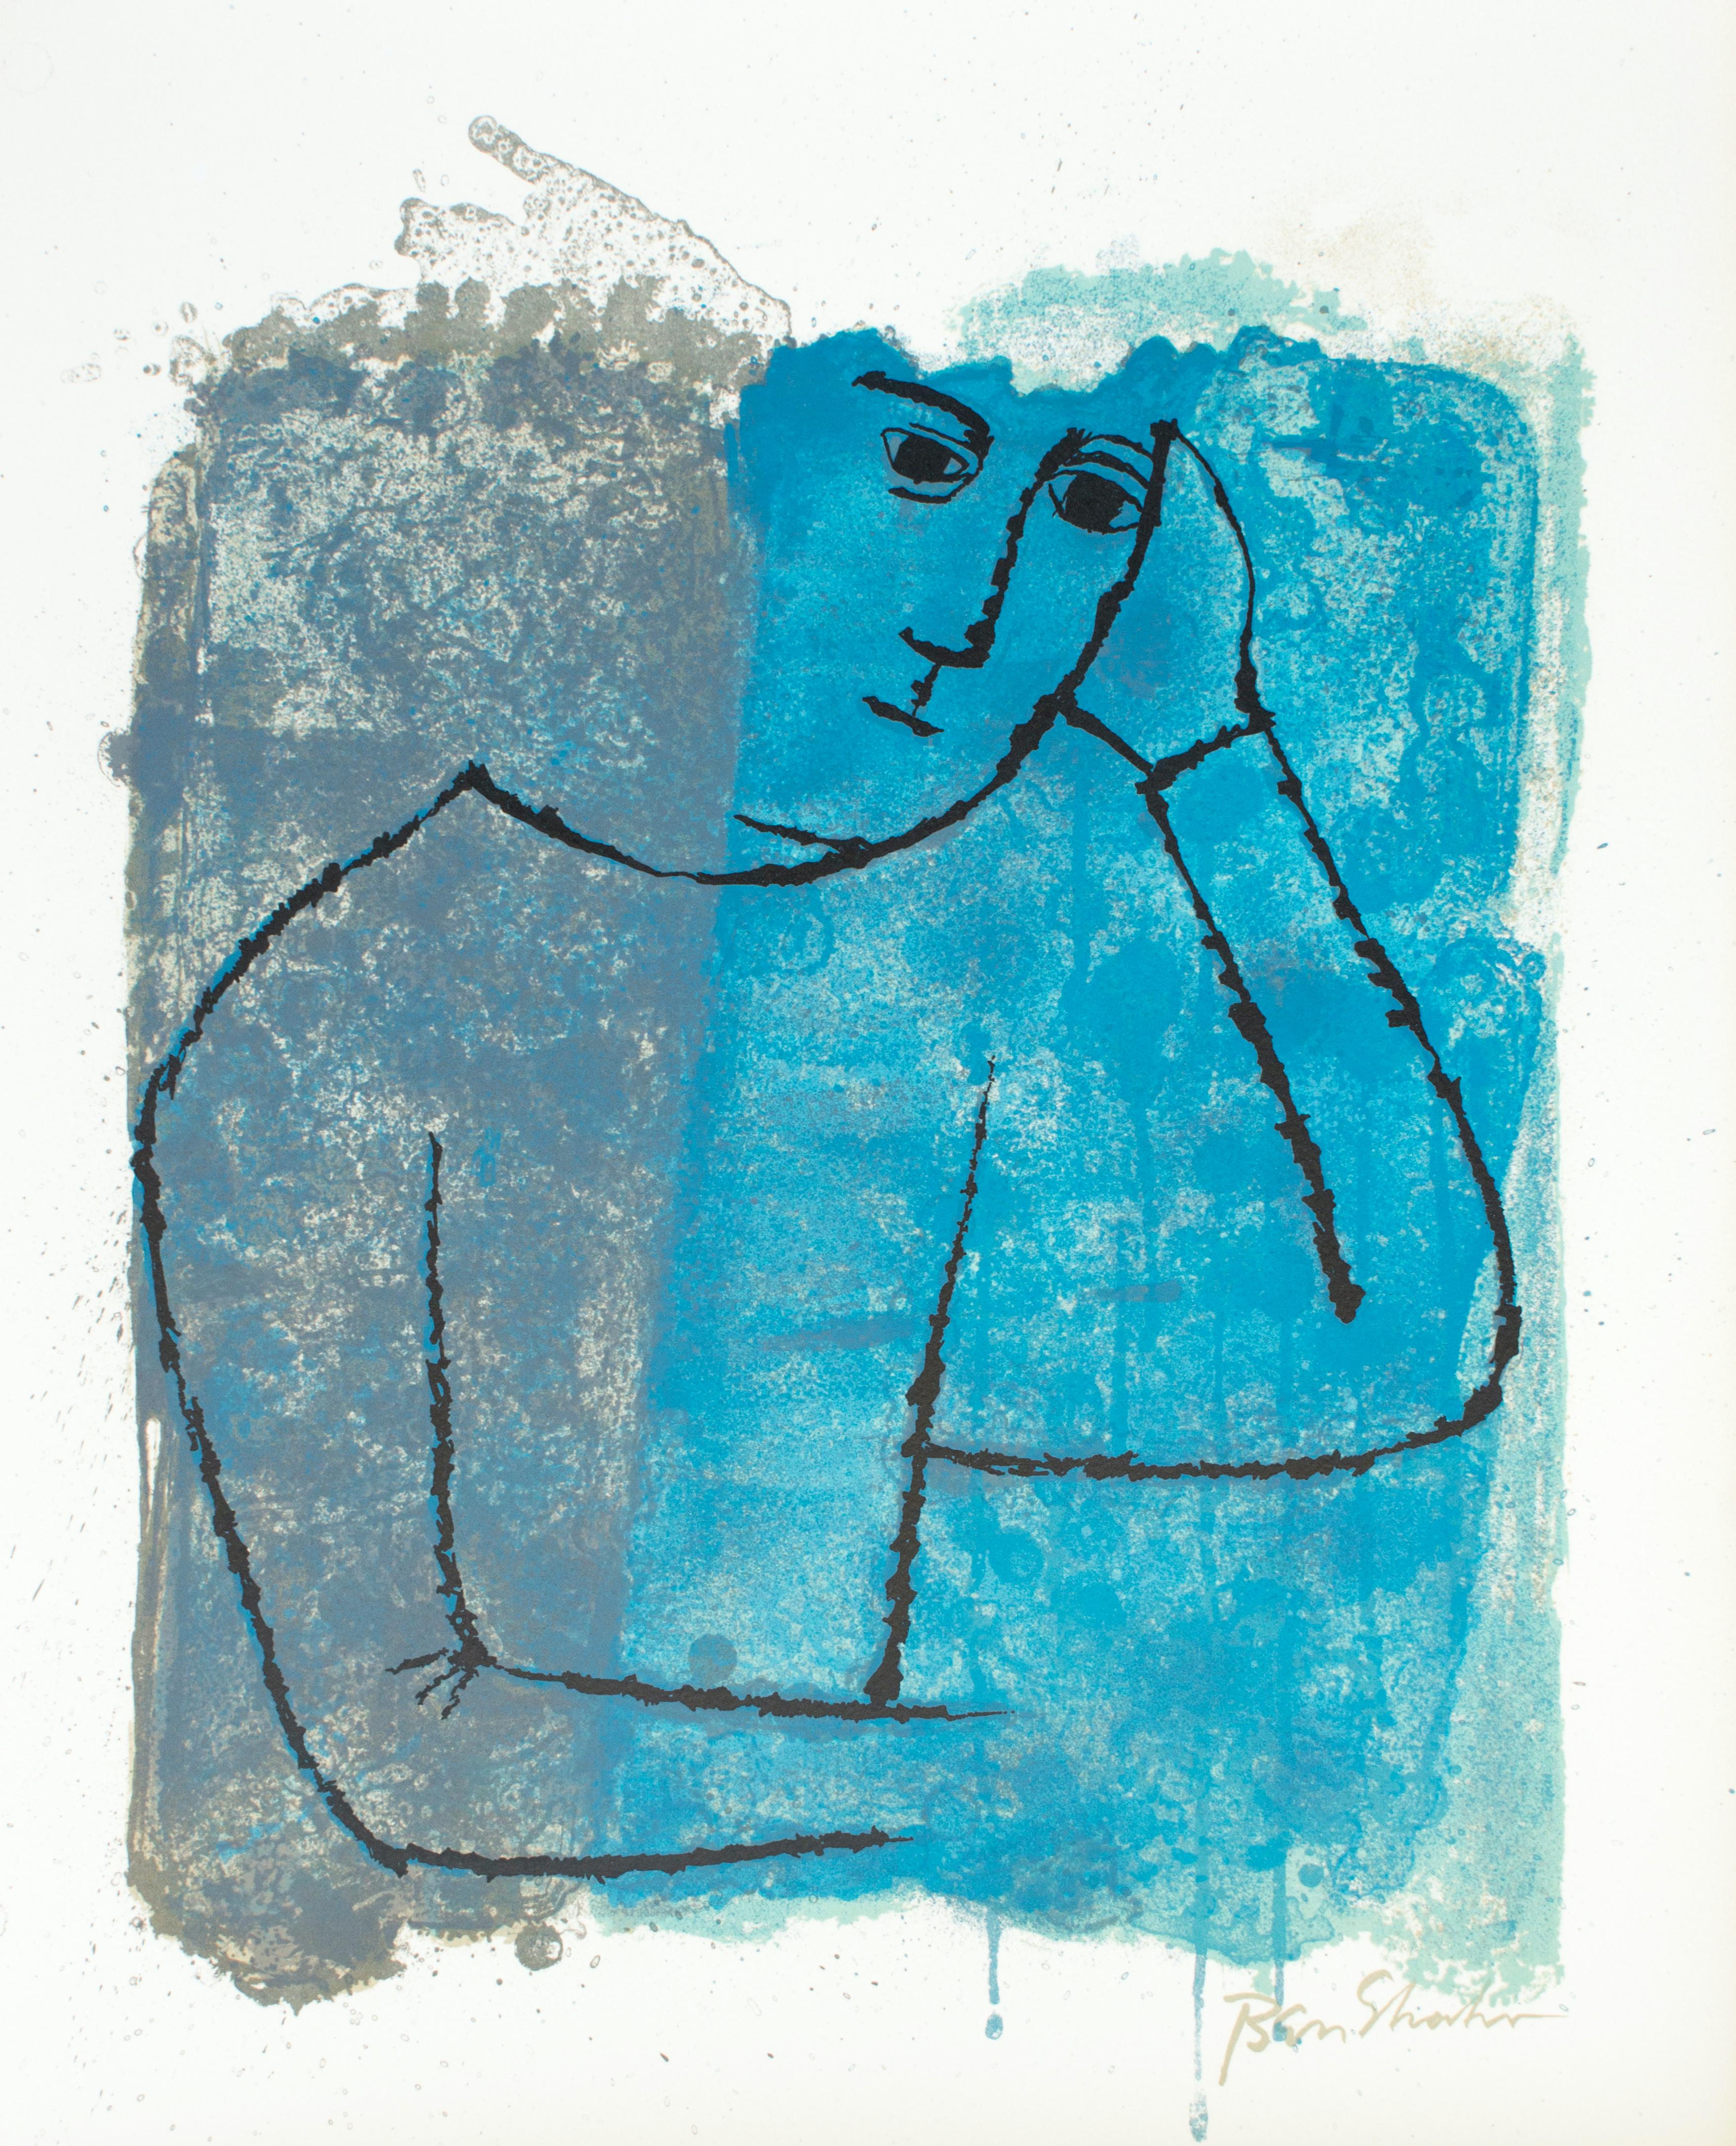 Ben Shahn Figurative Print - For the Sake of a Single Verse - by R.M. Rilke with Ill. by B. Shahn - 1968 